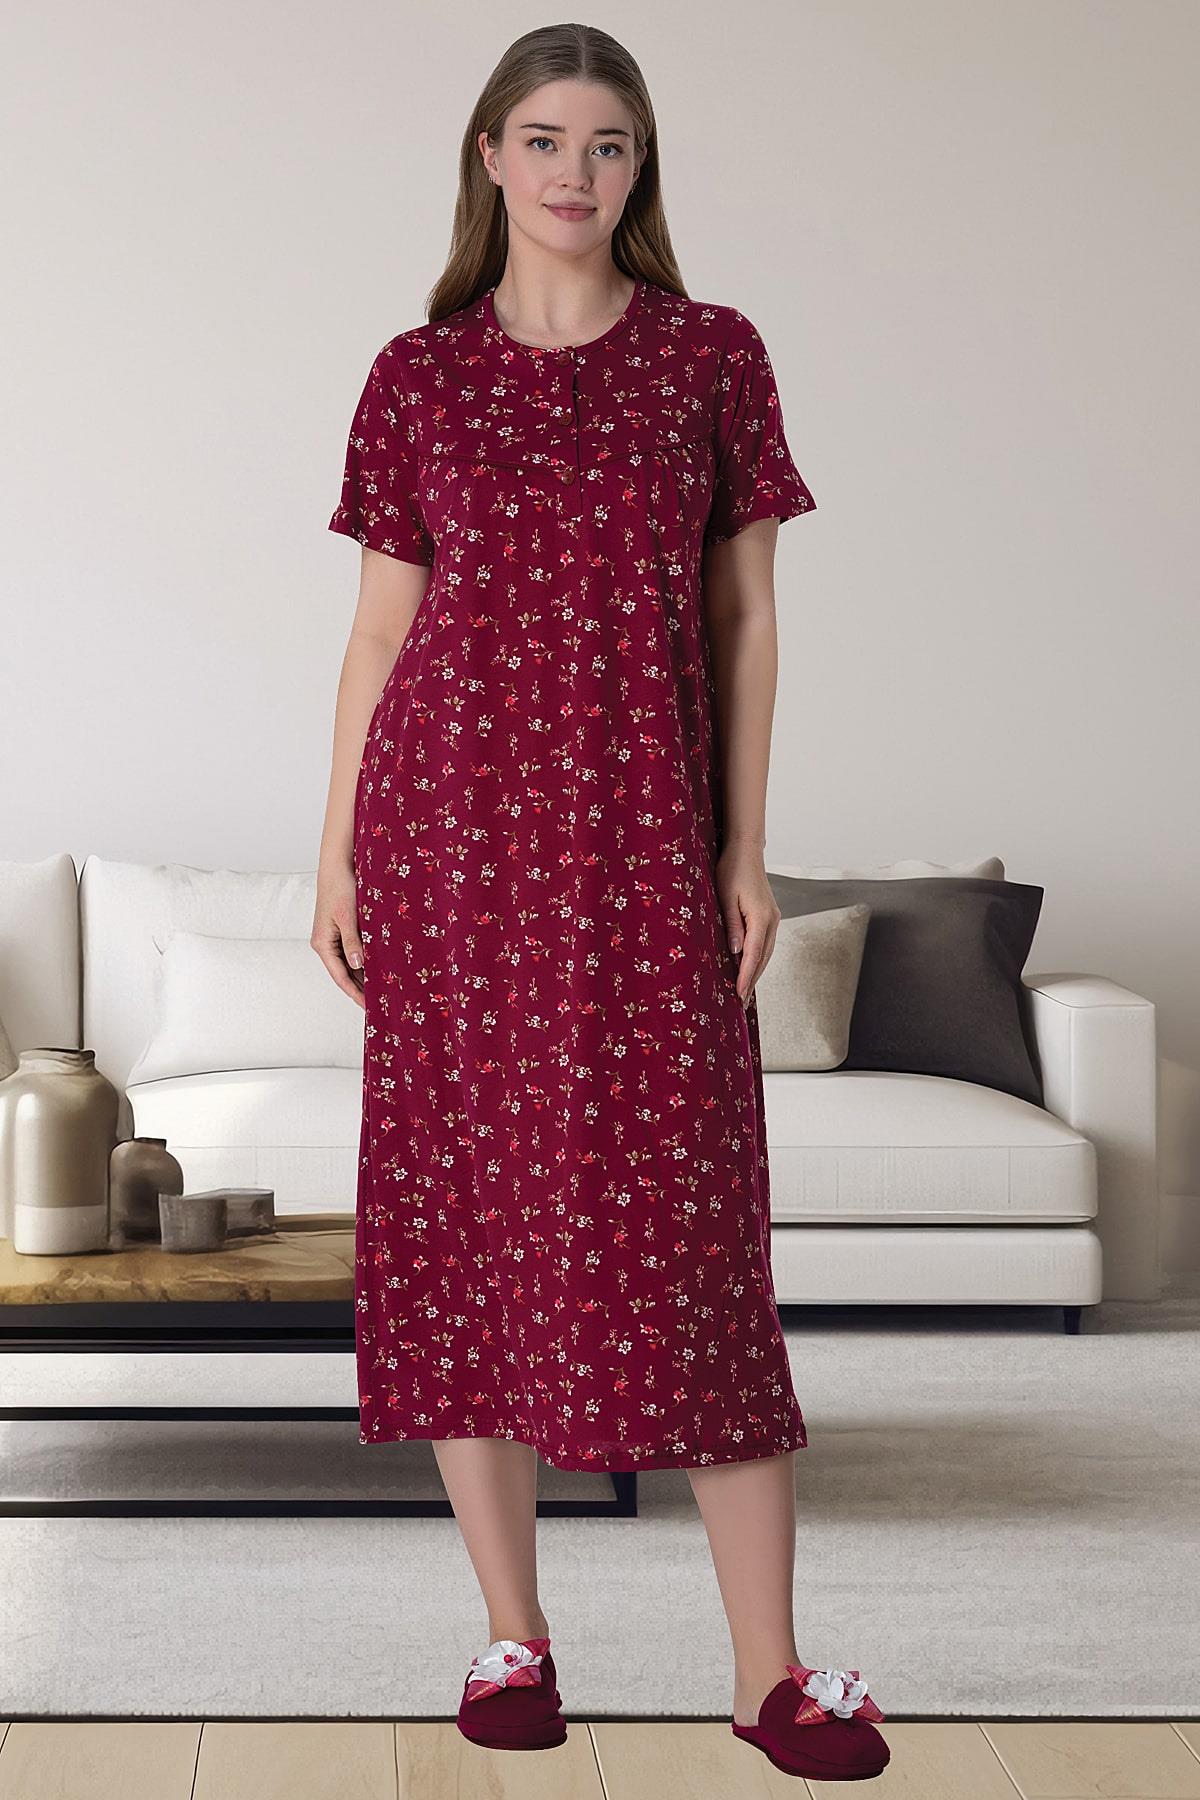 Shopymommy 6024 Flowery Plus Size Maternity & Nursing Nightgown Claret Red